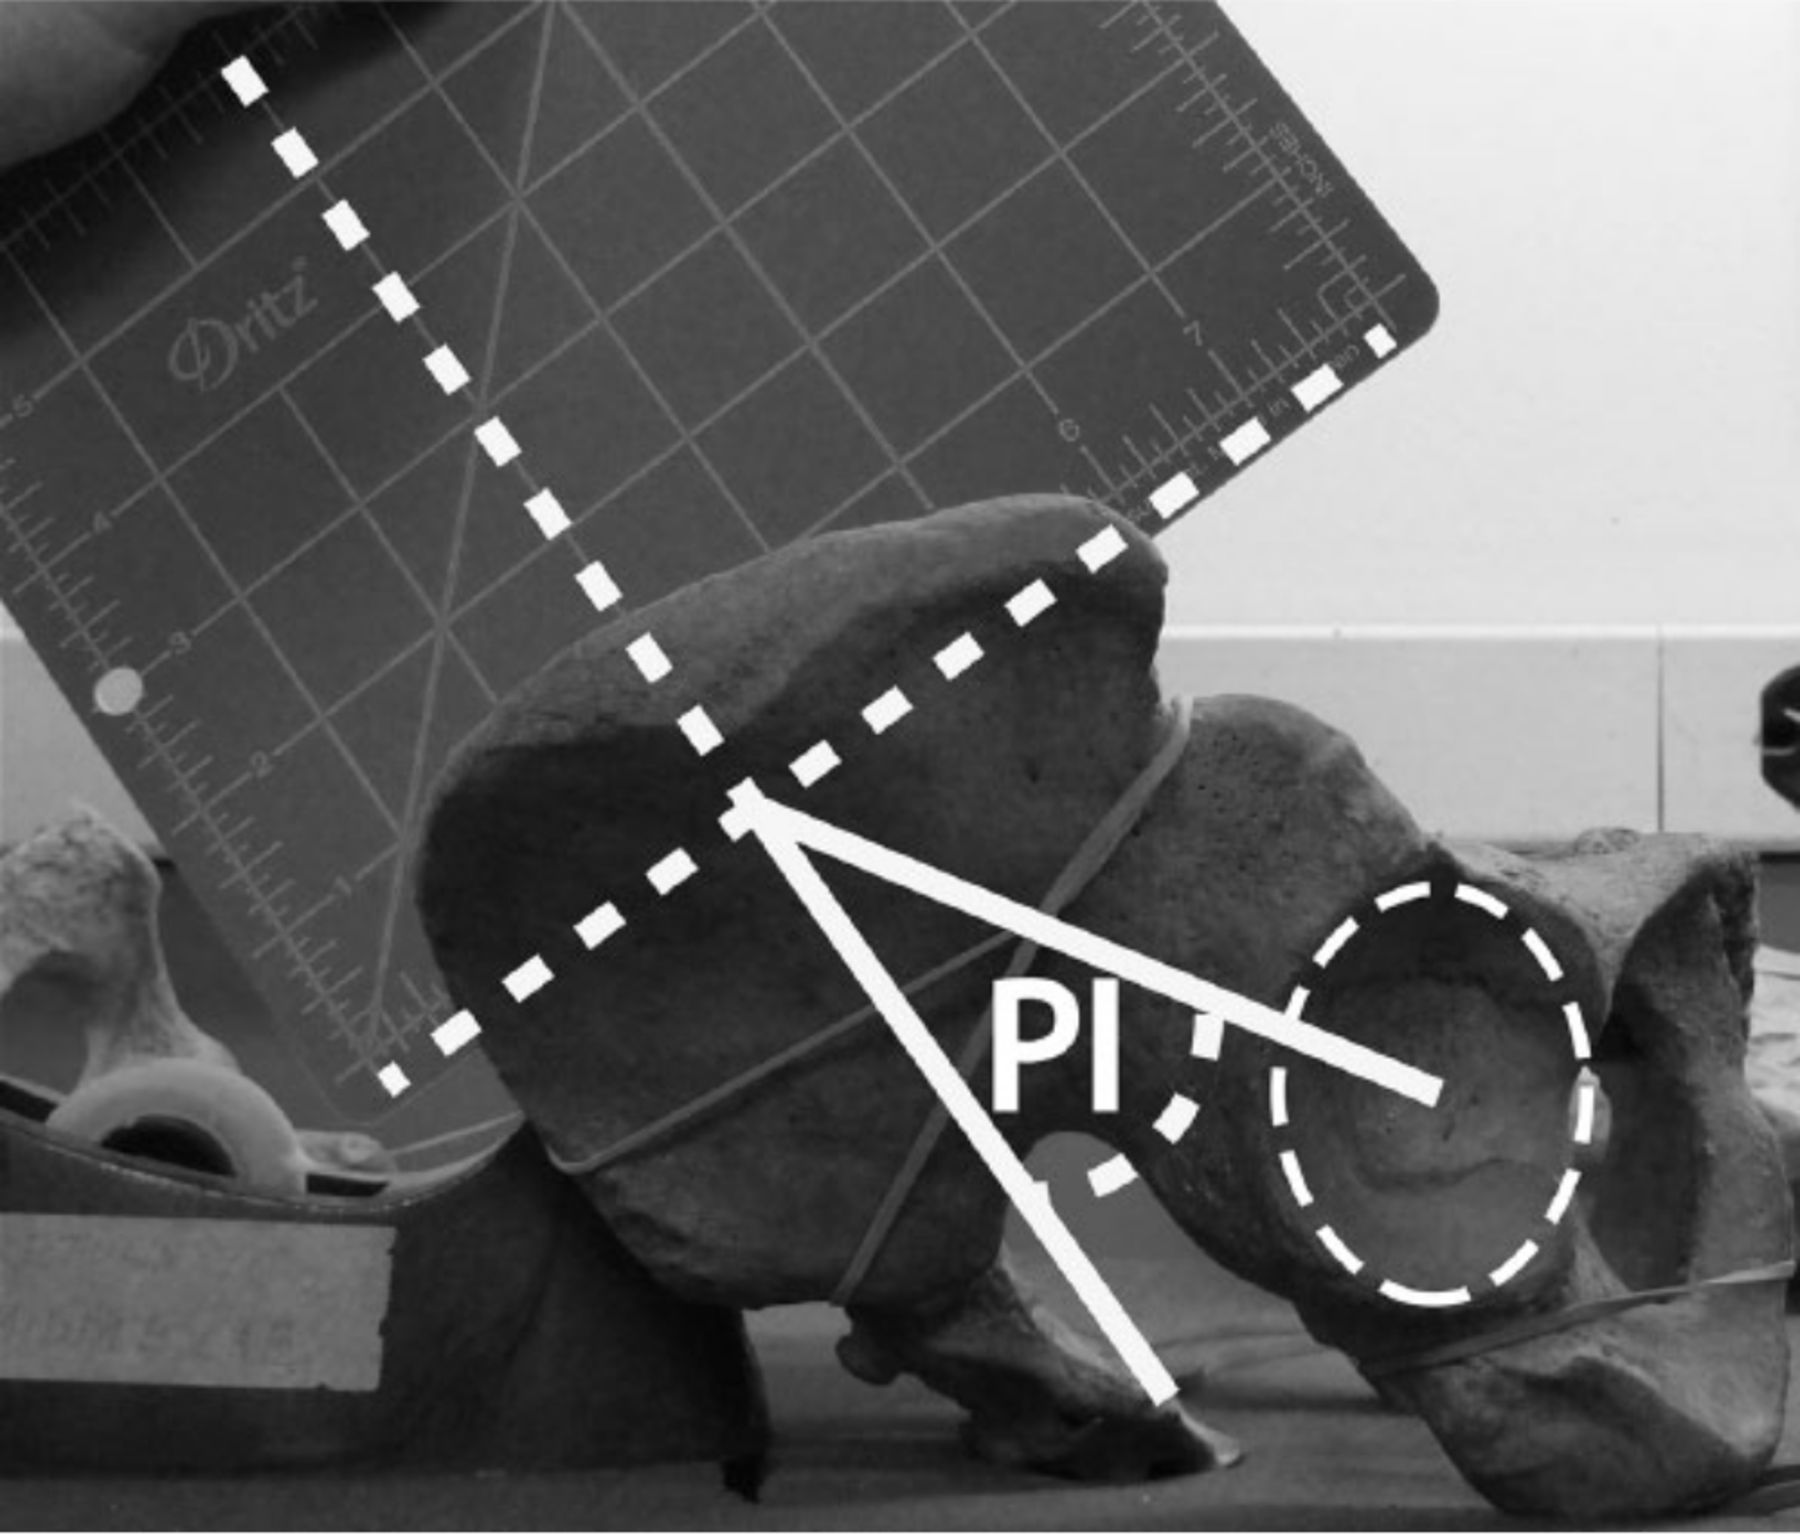 Fig. 3 
          Measurement of pelvic incidence (PI), which was defined as the angle formed between a line perpendicular to the midpoint of the sacral endplate and a line connecting the centre of the sacral endplate and the centre of the best-fit ellipse of the acetabular rim. The best fit ellipse of the acetabular rim serves as a surrogate marker of the femoral head axis.
        